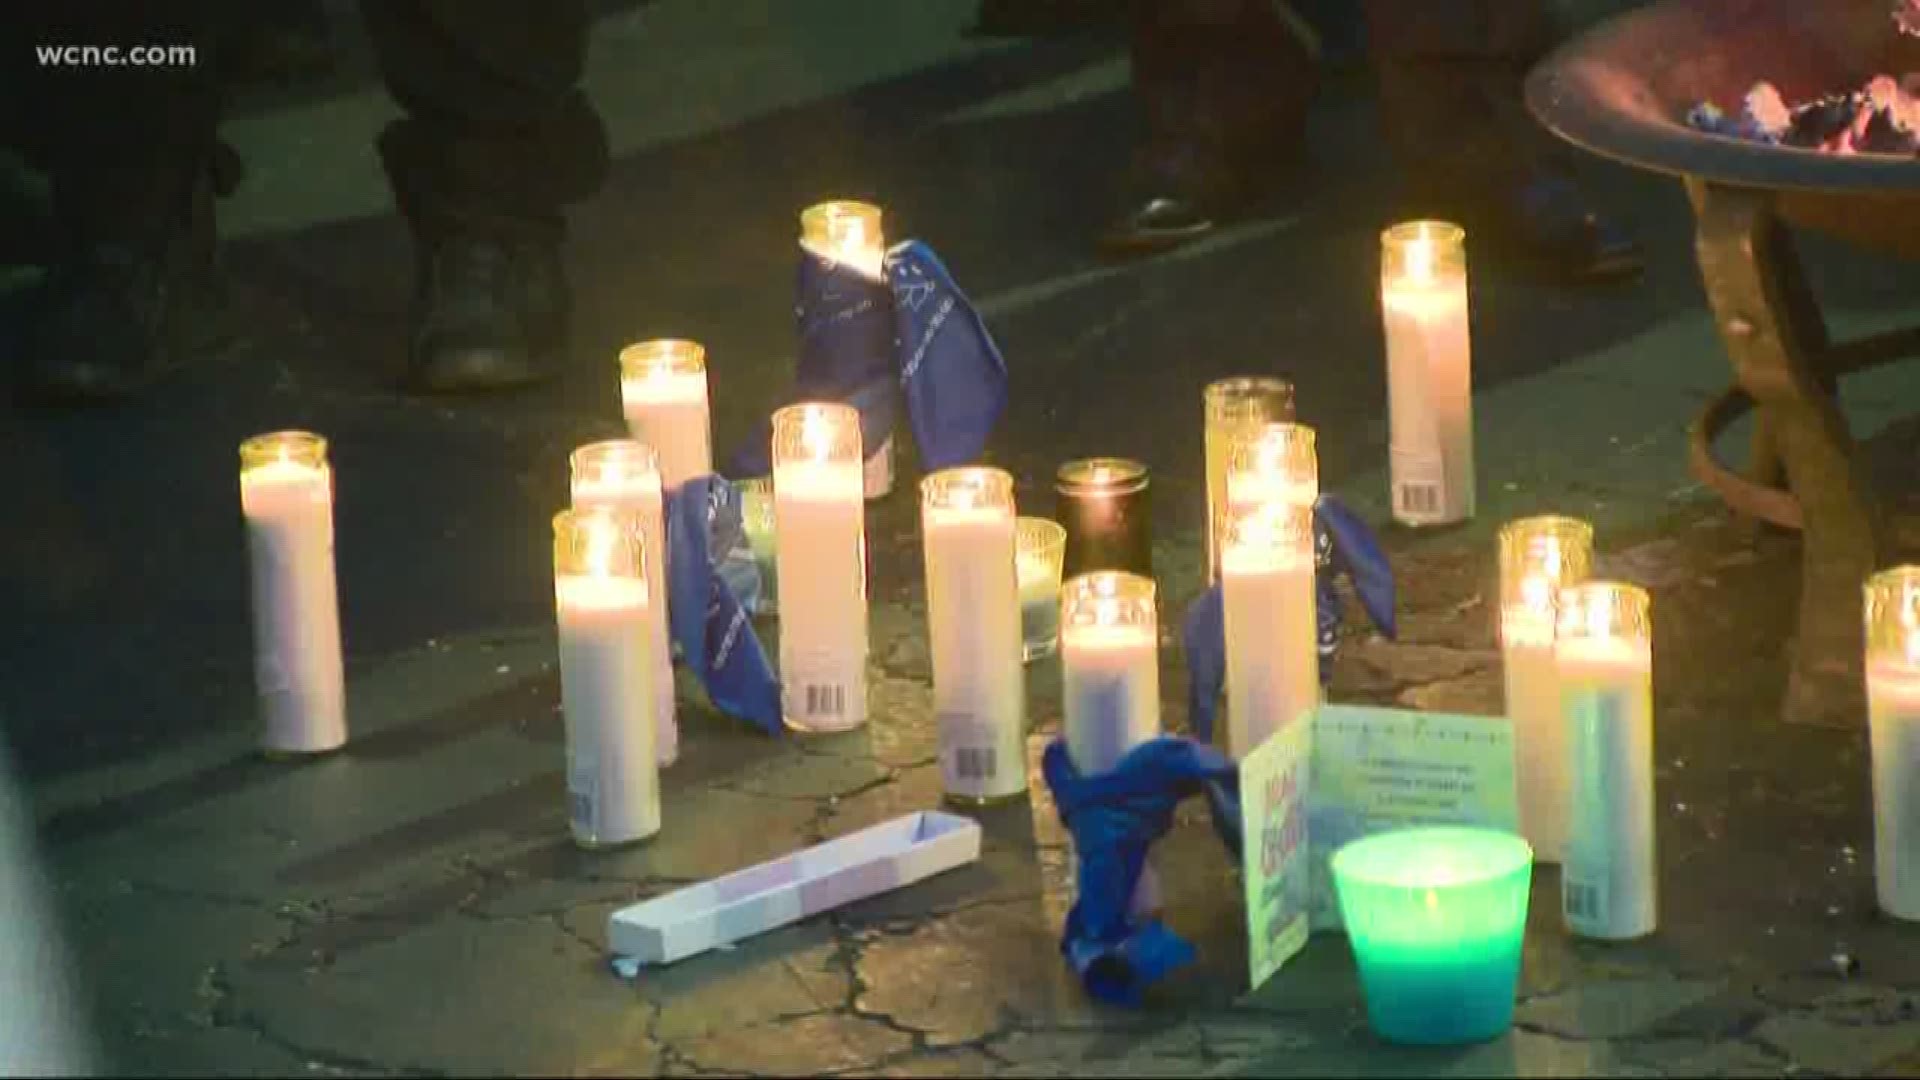 Wednesday night’s vigil was the latest of many in recent weeks, honoring victims of senseless gun violence across the Queen City, as well as Grammy Nominated Rapper Nipsey Hussle.